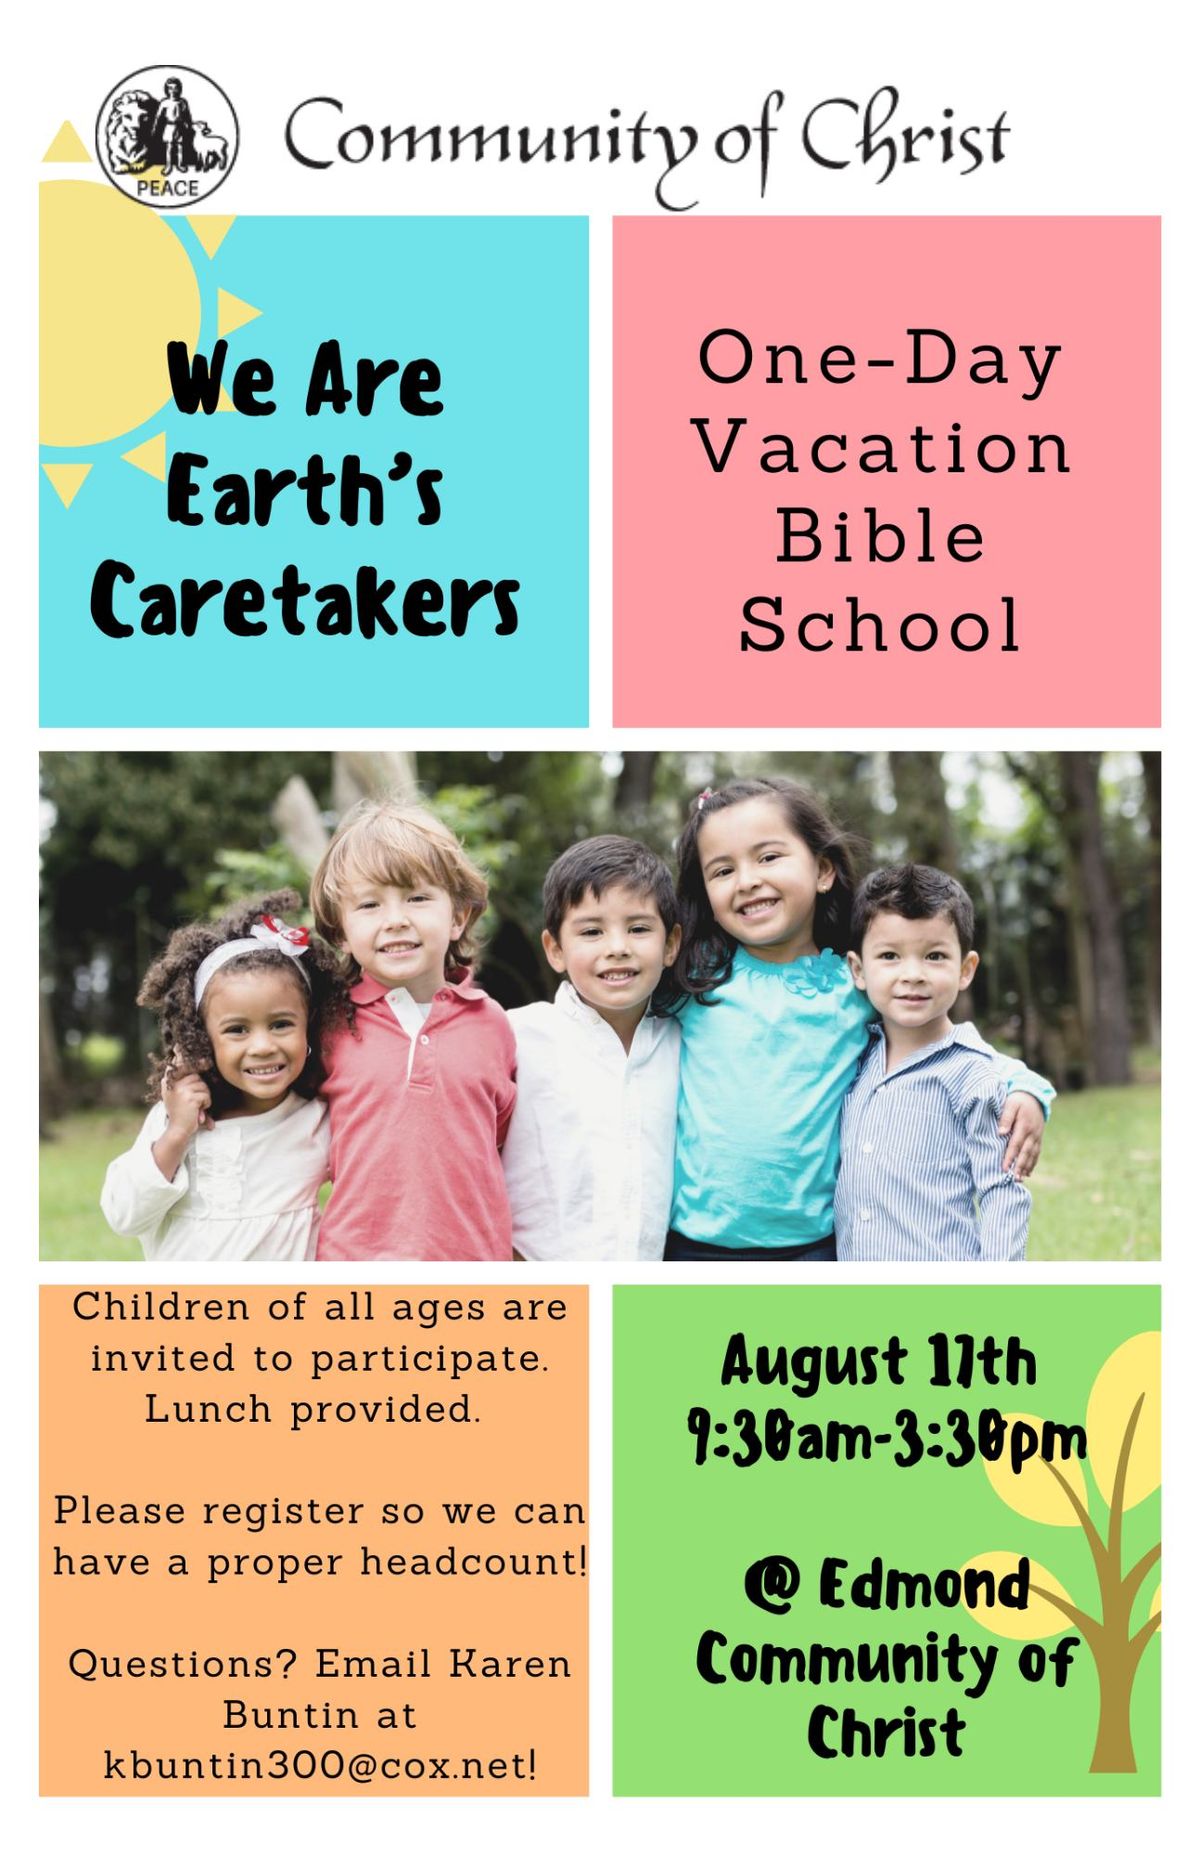 Vacation Bible School: We Are Earth's Caretakers